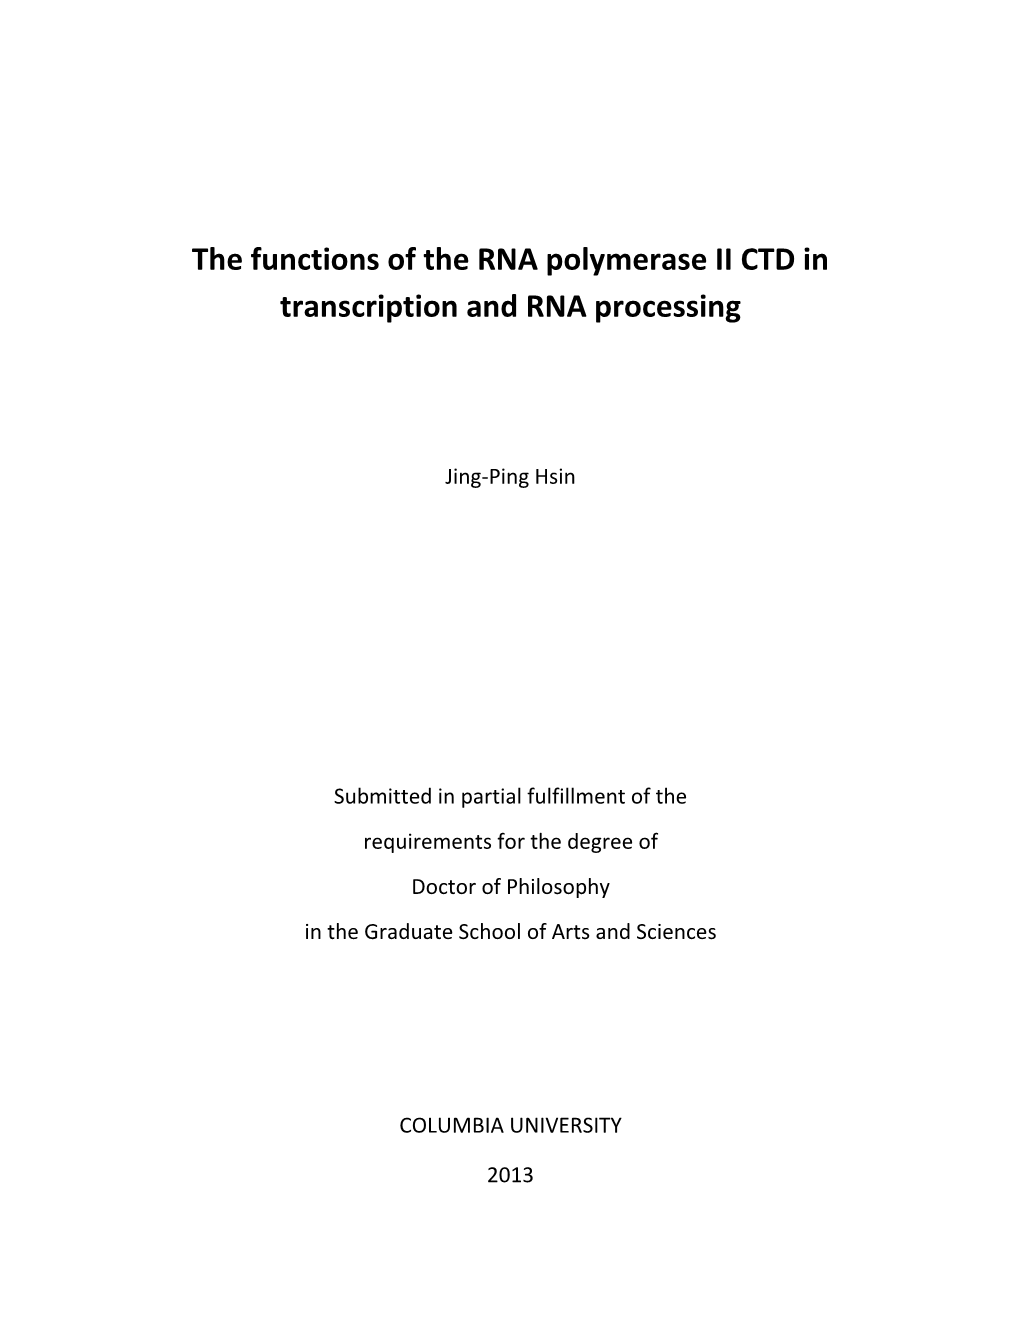 The Functions of the RNA Polymerase II CTD in Transcription and RNA Processing